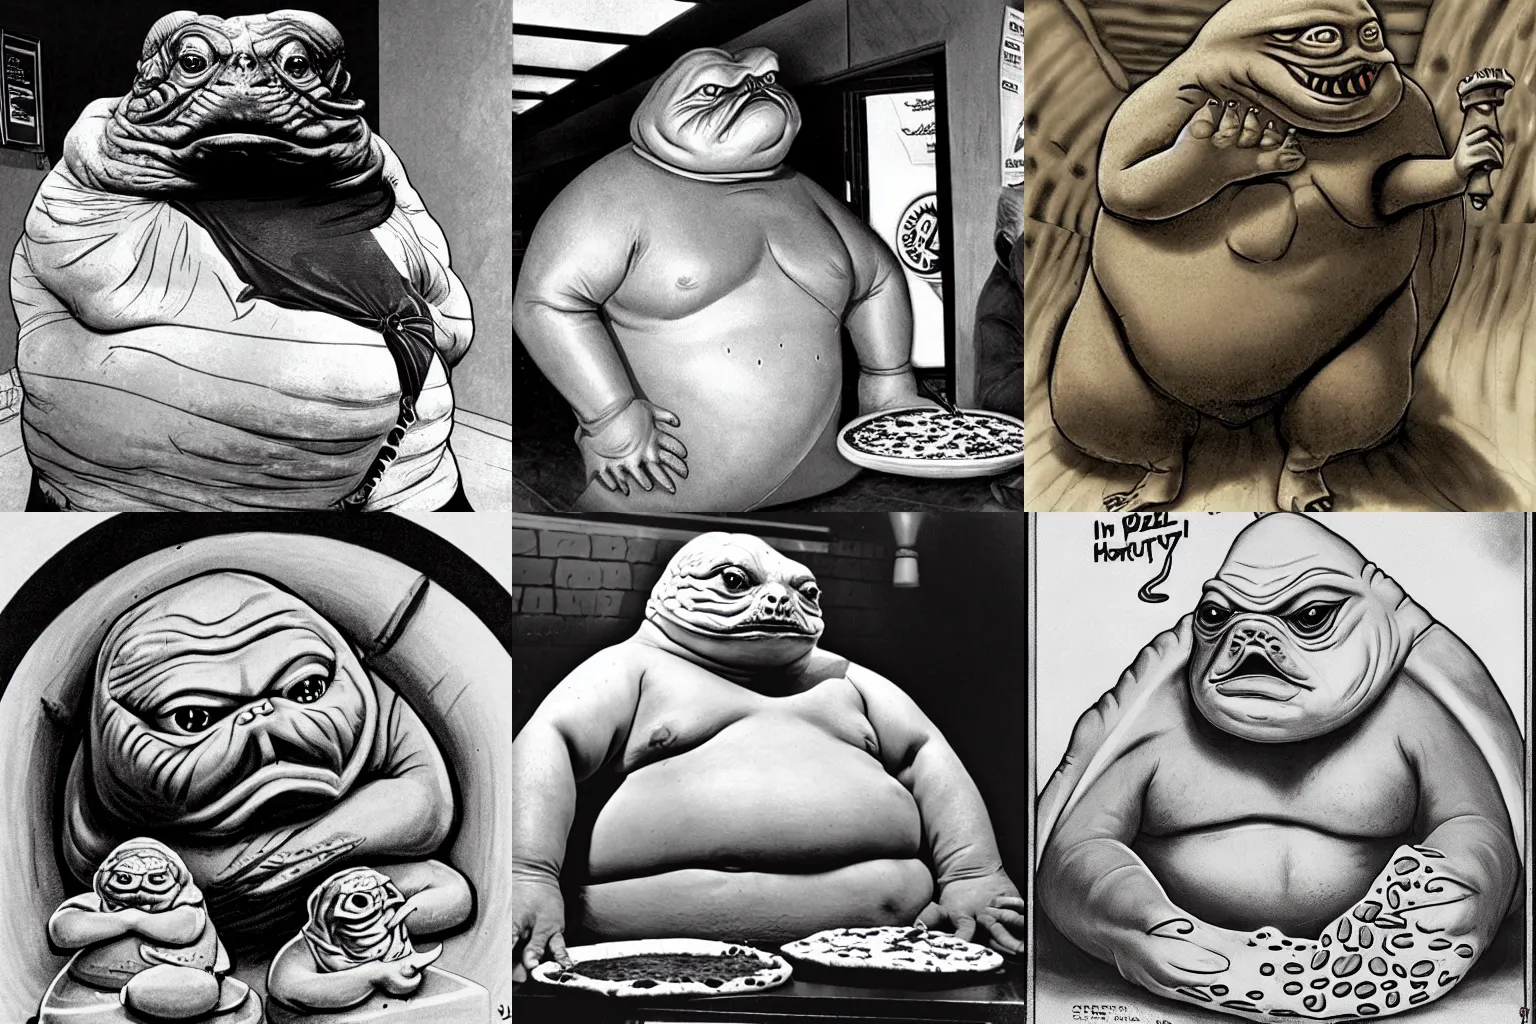 Prompt: Jabba the Hutt working at Pizza Hut by Ray Harryhausen